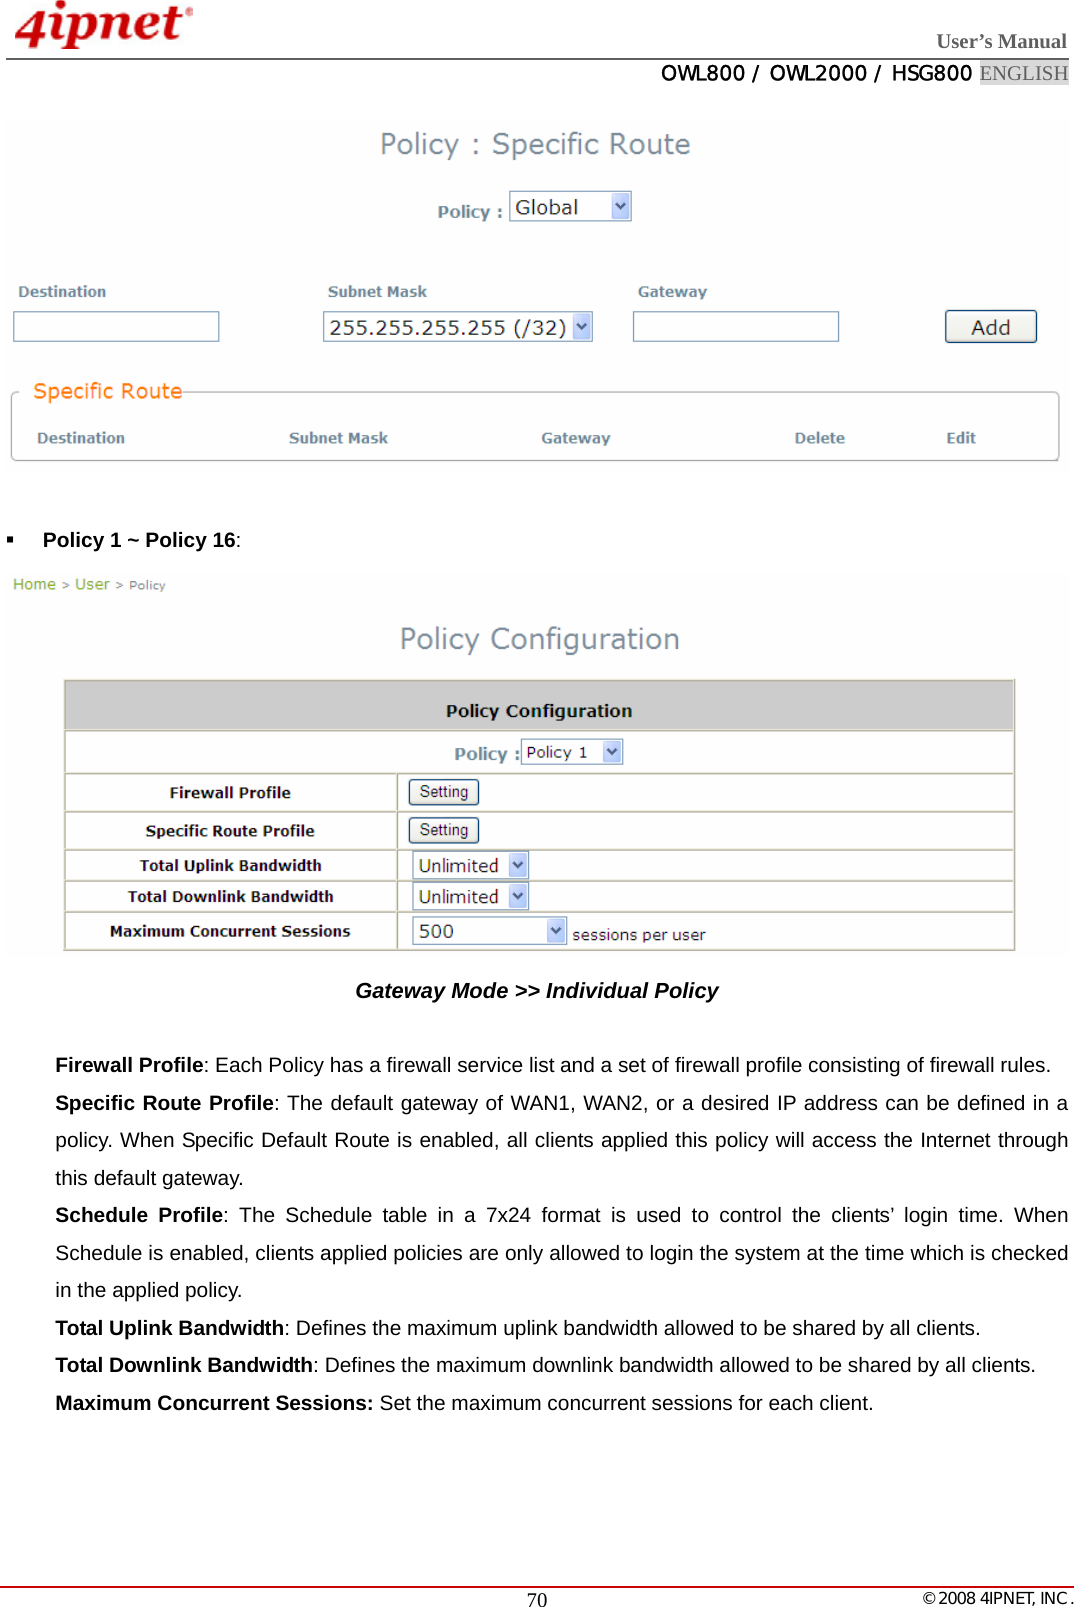  User’s Manual  OWL800 / OWL2000 / HSG800 ENGLISH   © 2008 4IPNET, INC.  70   Policy 1 ~ Policy 16:  Gateway Mode &gt;&gt; Individual Policy  Firewall Profile: Each Policy has a firewall service list and a set of firewall profile consisting of firewall rules. Specific Route Profile: The default gateway of WAN1, WAN2, or a desired IP address can be defined in a policy. When Specific Default Route is enabled, all clients applied this policy will access the Internet through this default gateway. Schedule Profile: The Schedule table in a 7x24 format is used to control the clients’ login time. When Schedule is enabled, clients applied policies are only allowed to login the system at the time which is checked in the applied policy. Total Uplink Bandwidth: Defines the maximum uplink bandwidth allowed to be shared by all clients. Total Downlink Bandwidth: Defines the maximum downlink bandwidth allowed to be shared by all clients. Maximum Concurrent Sessions: Set the maximum concurrent sessions for each client.   